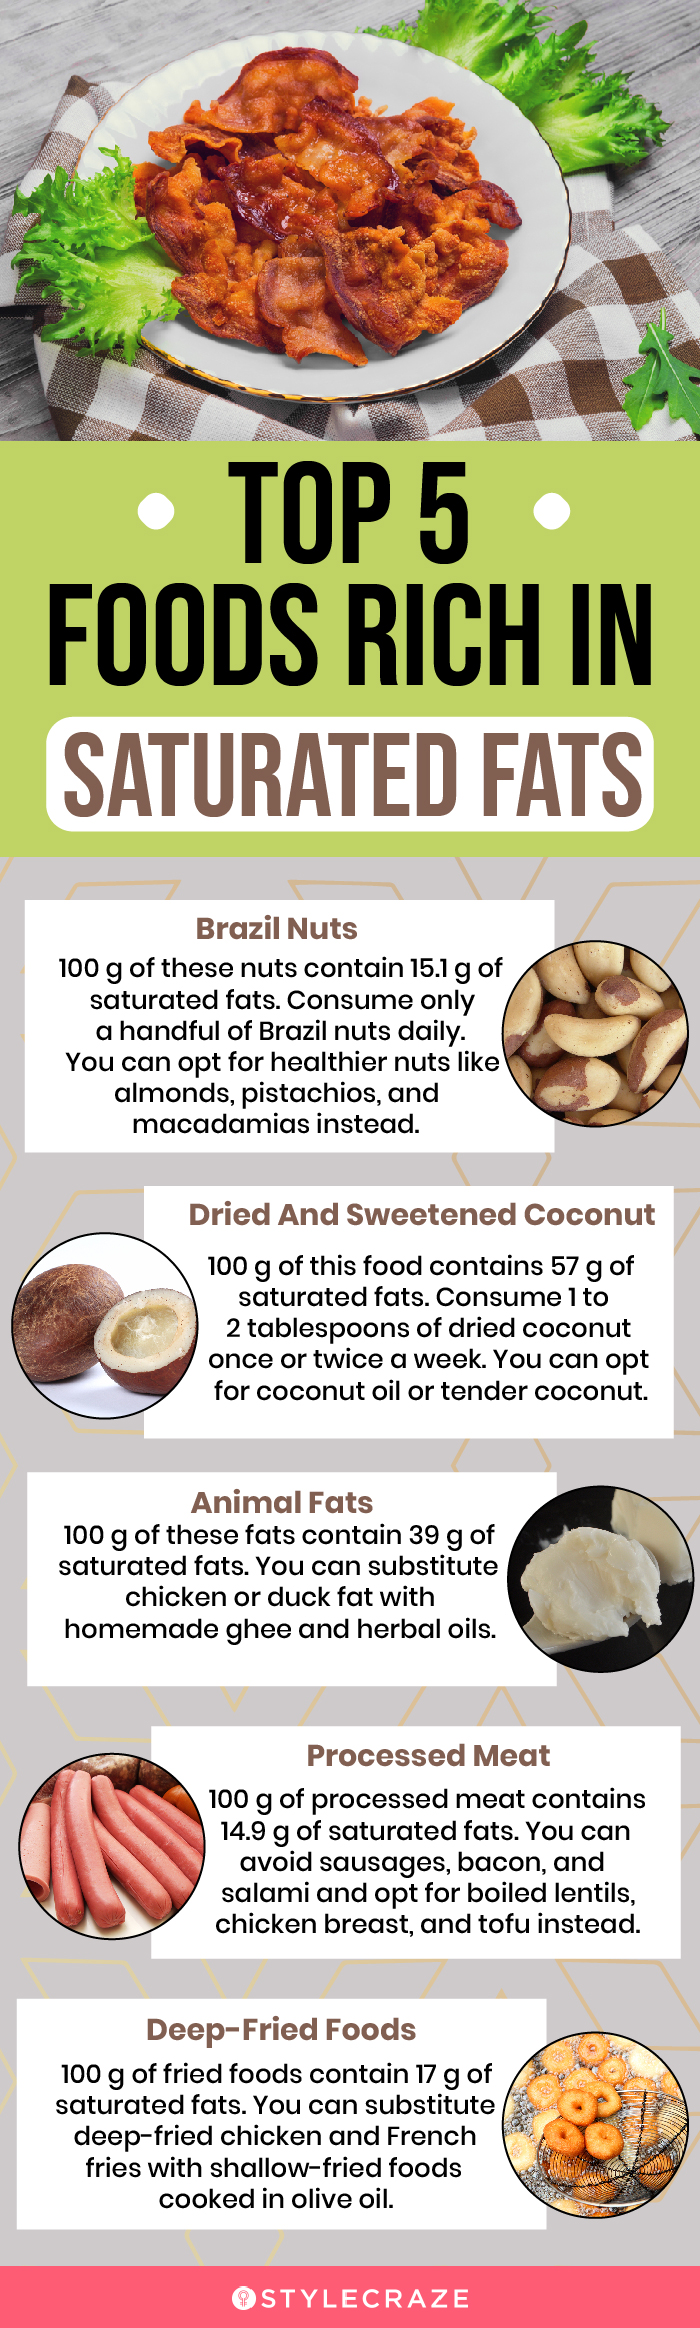 top 5 foods rich in saturated fats (infographic)